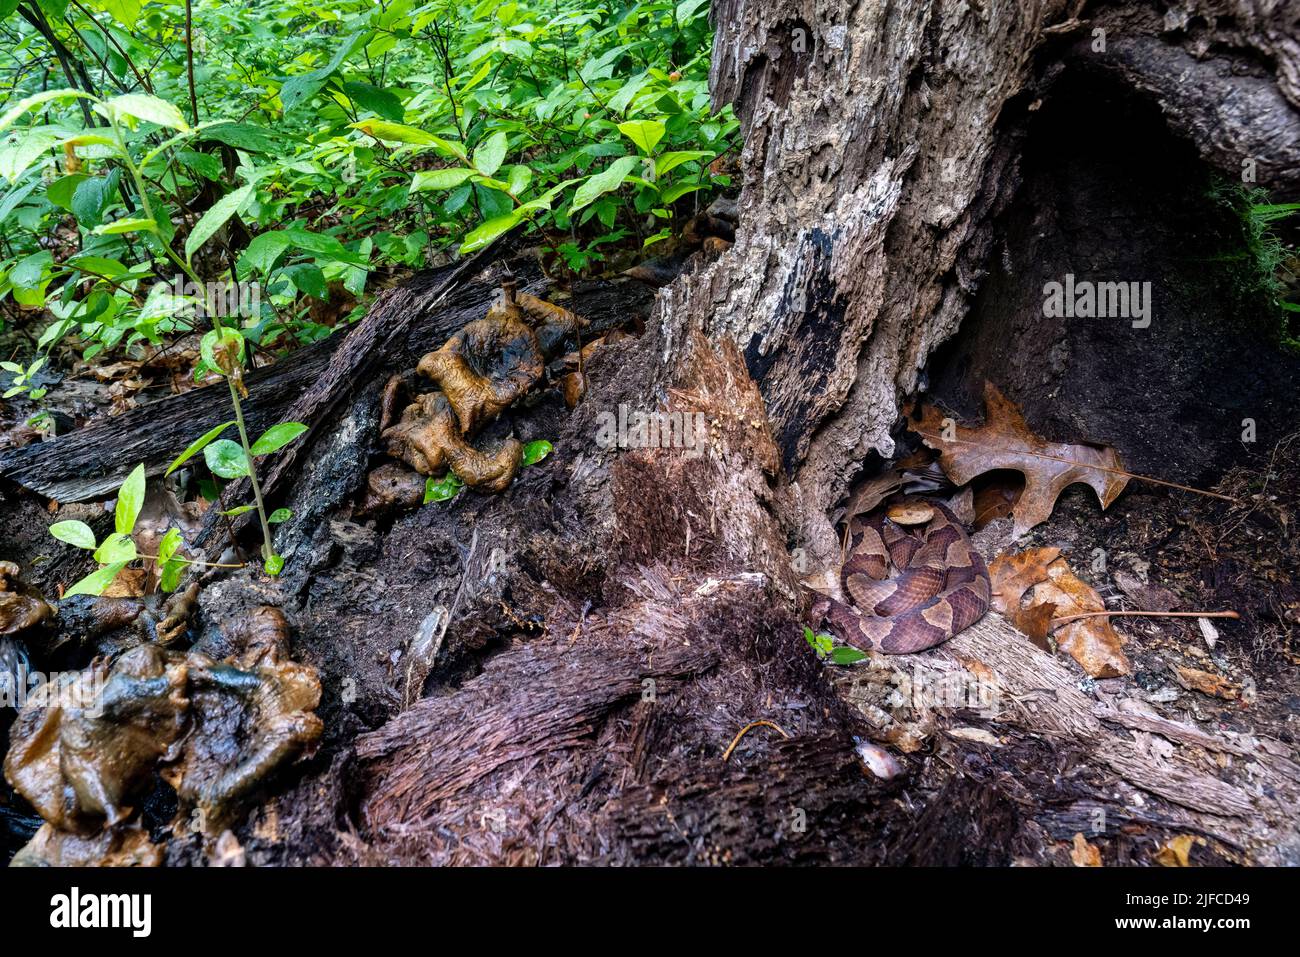 Eastern copperhead (Agkistrodon contortrix)  coiled in tree stump while an eastern garter snake (Thamnophis sirtalis sirtalis) pokes its head out near Stock Photo